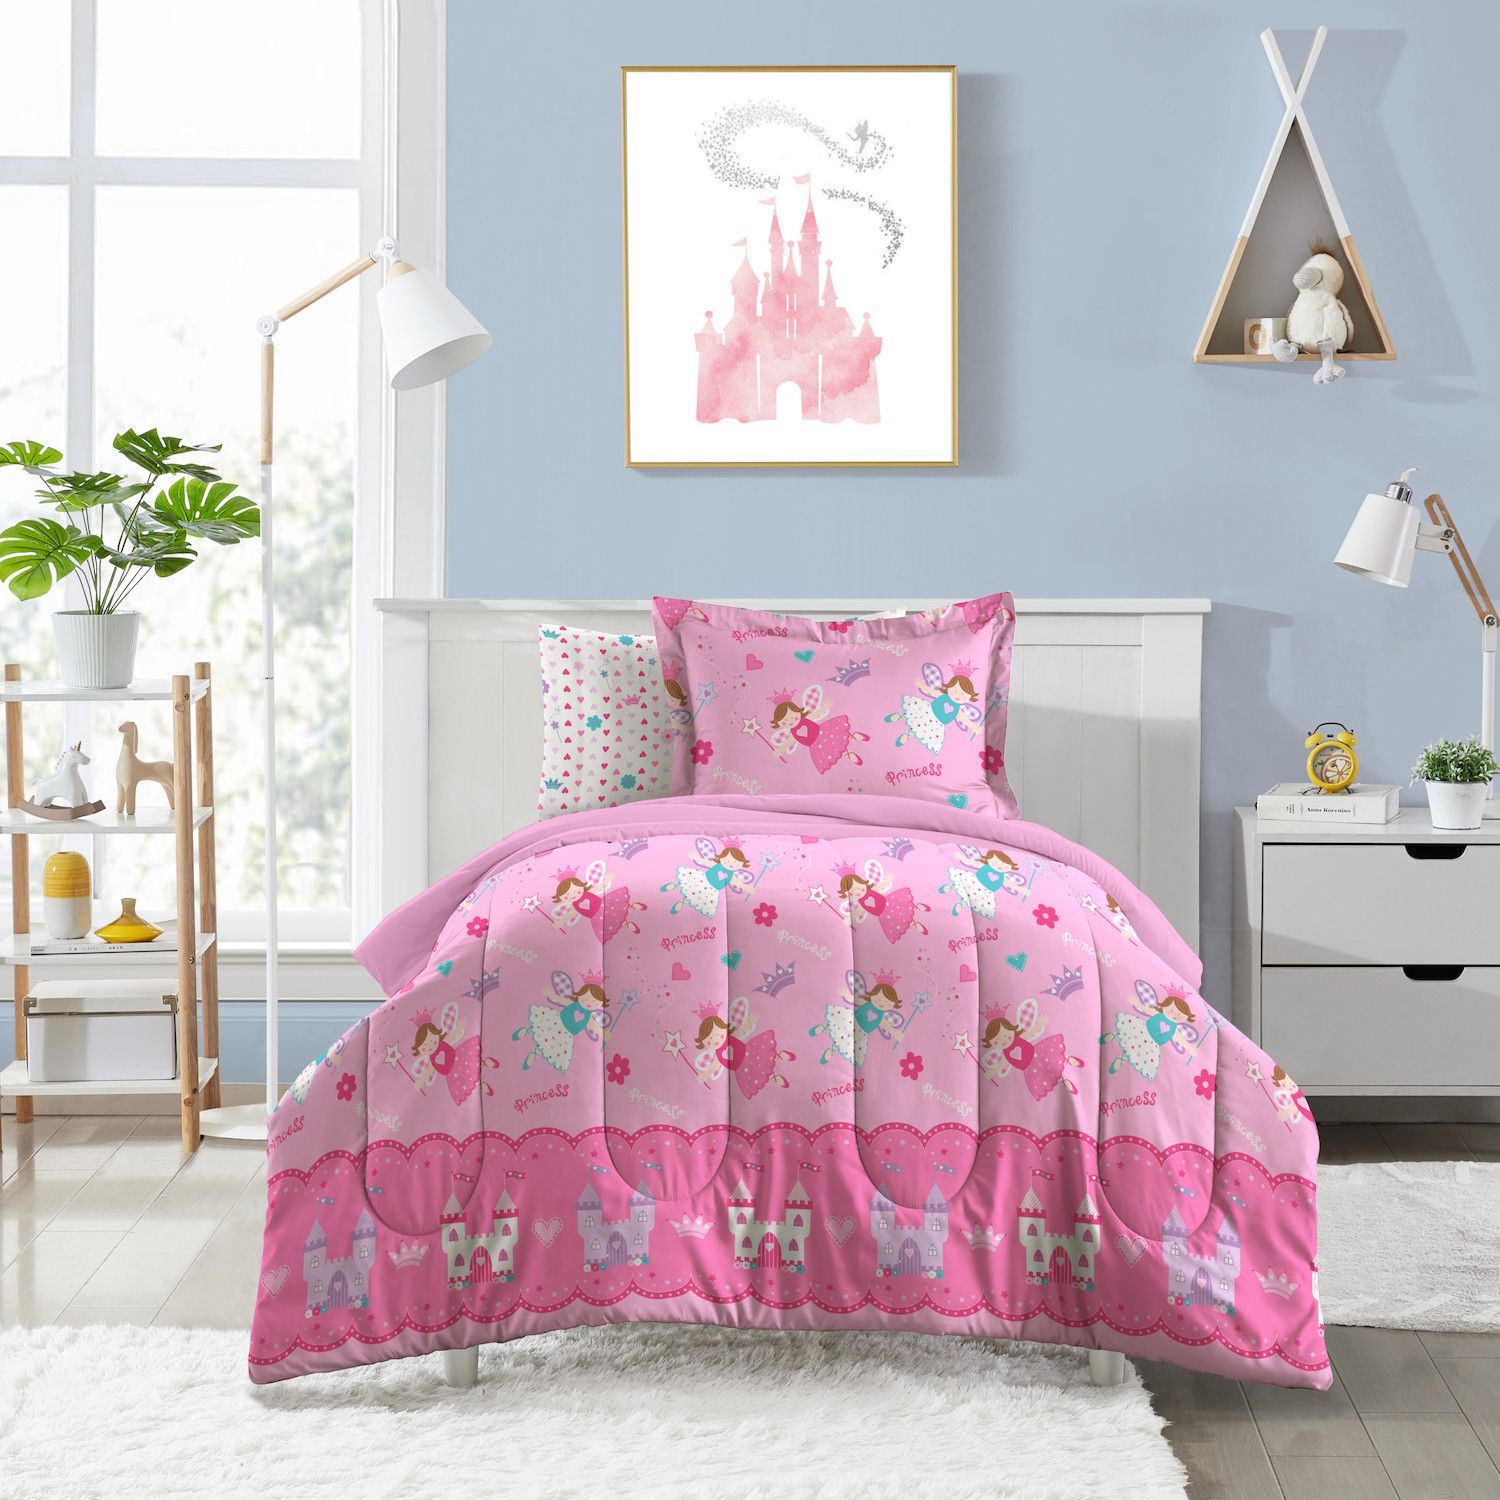 Image for Dream Factory Magical Princess 5-piece Twin Bed Set at Kohl's.